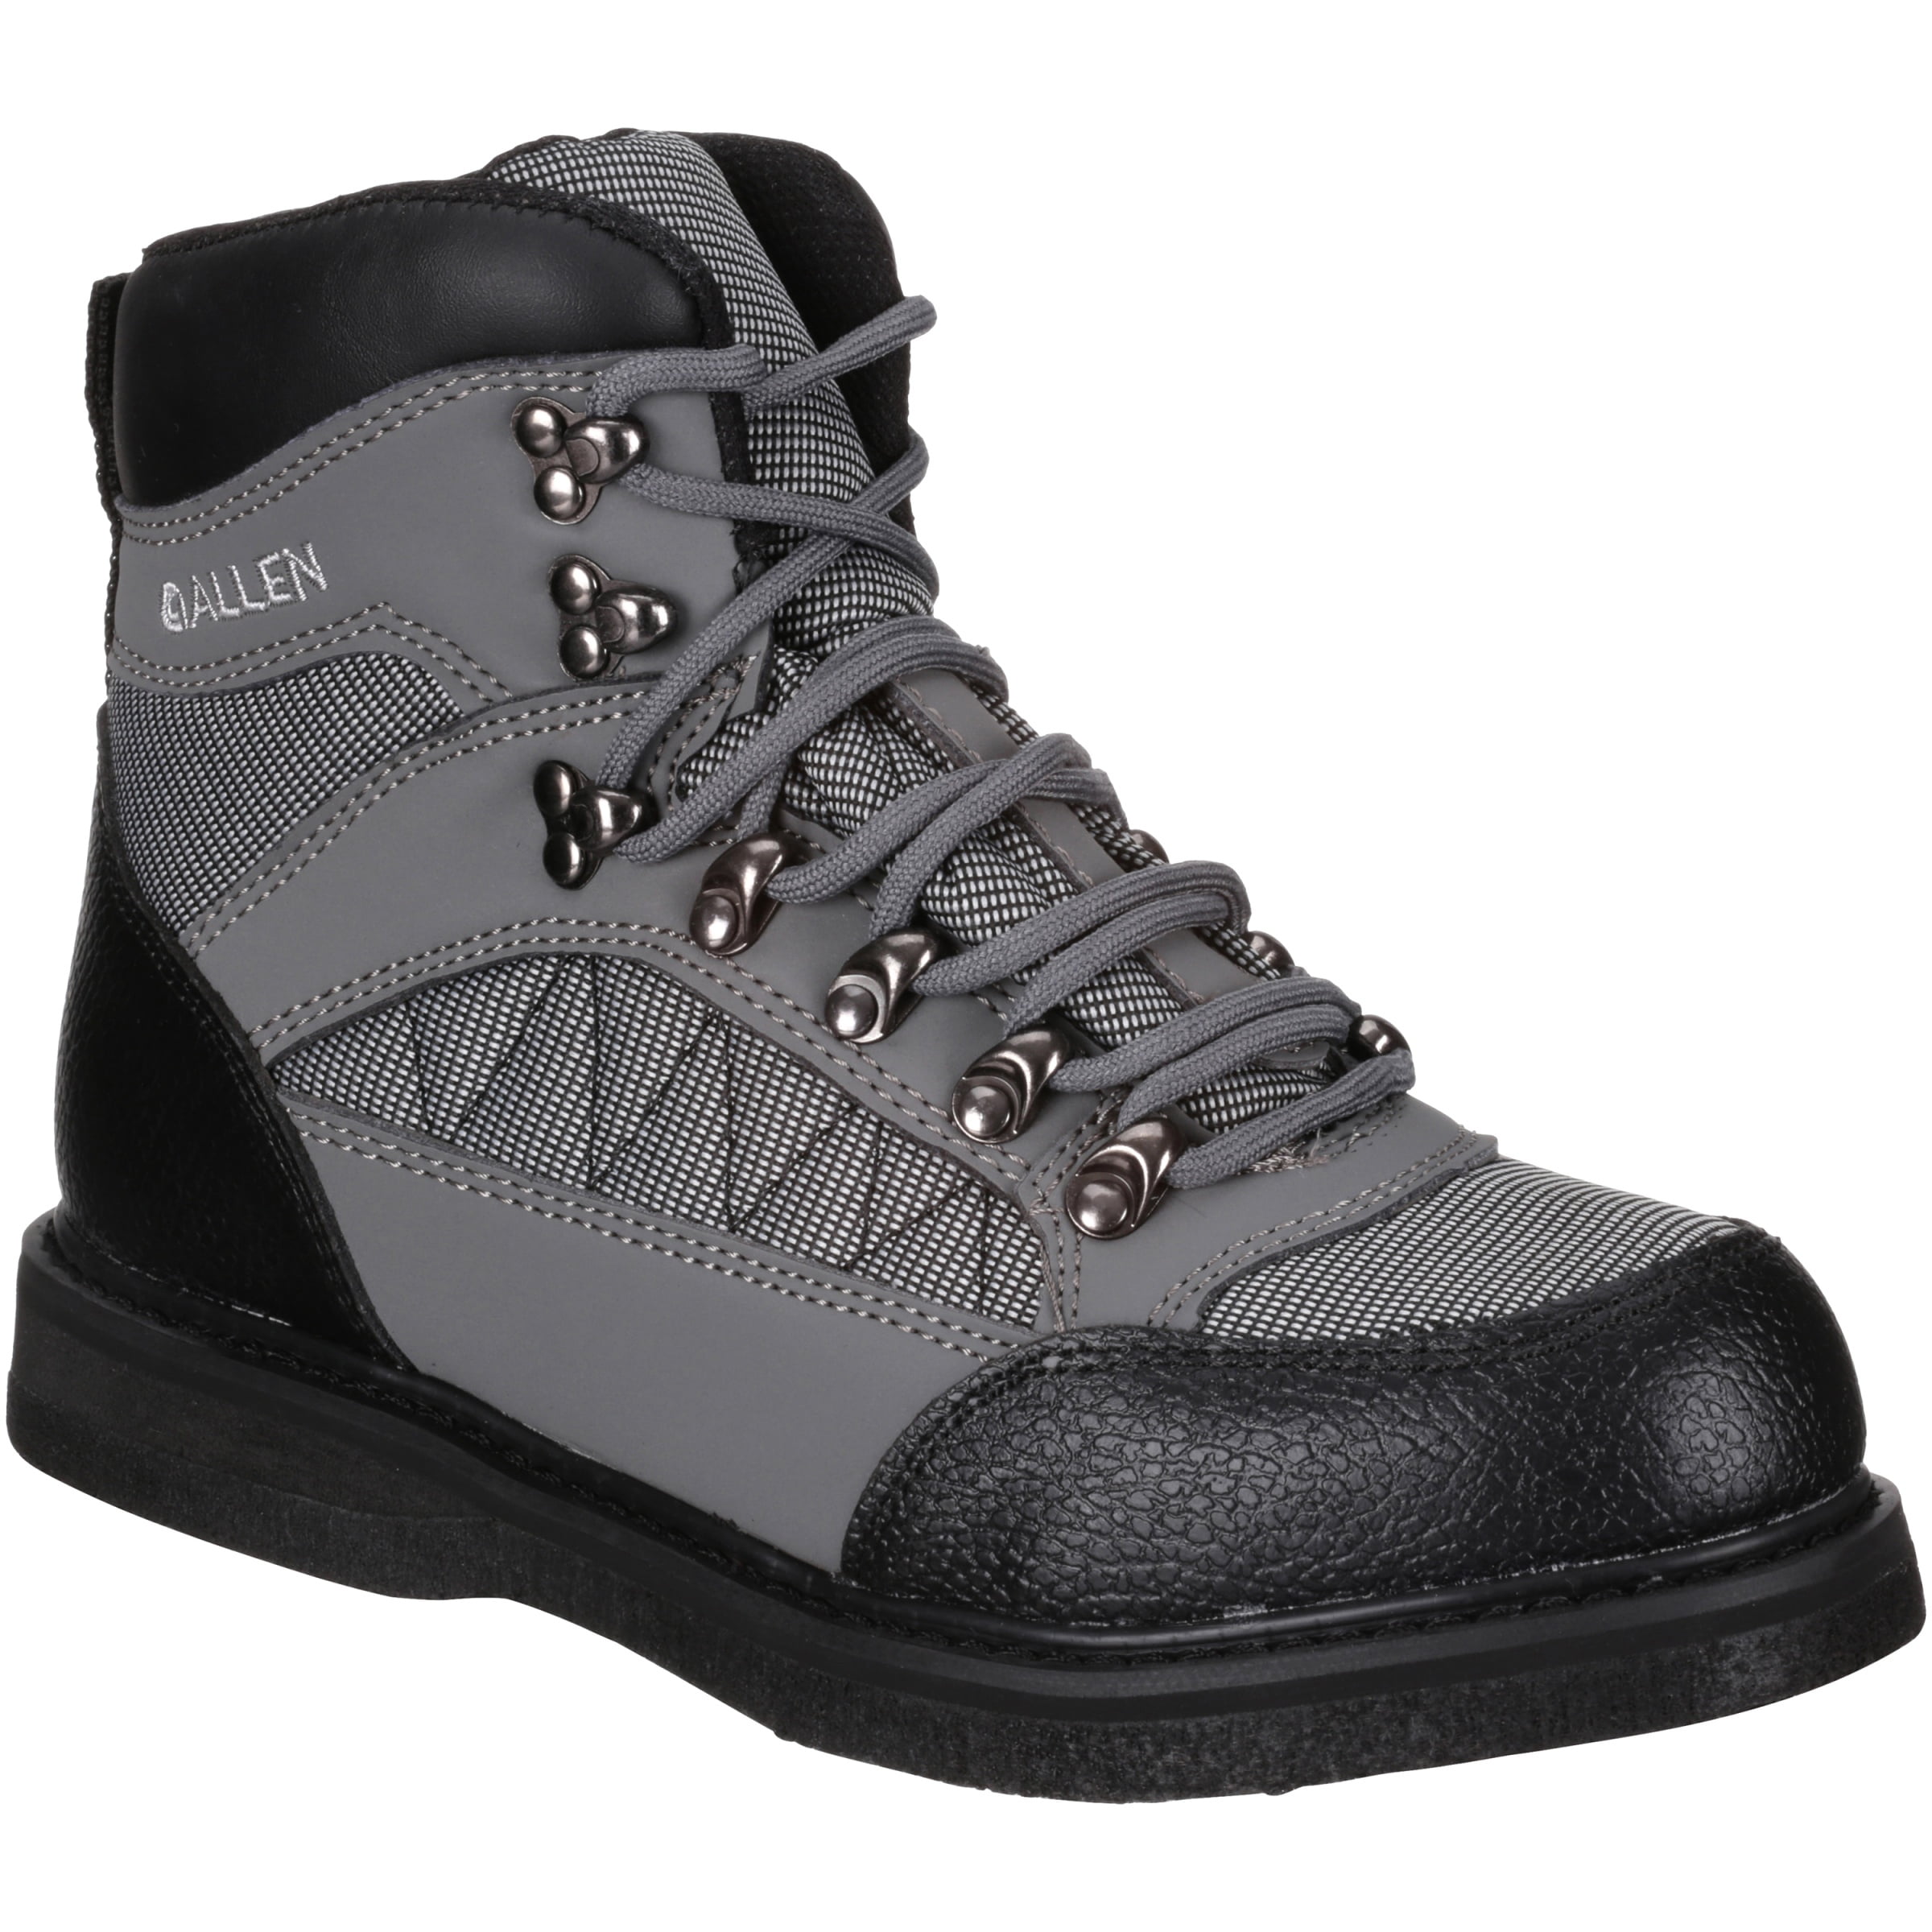 Granite MenRiver Wading Boots by Allen Company 